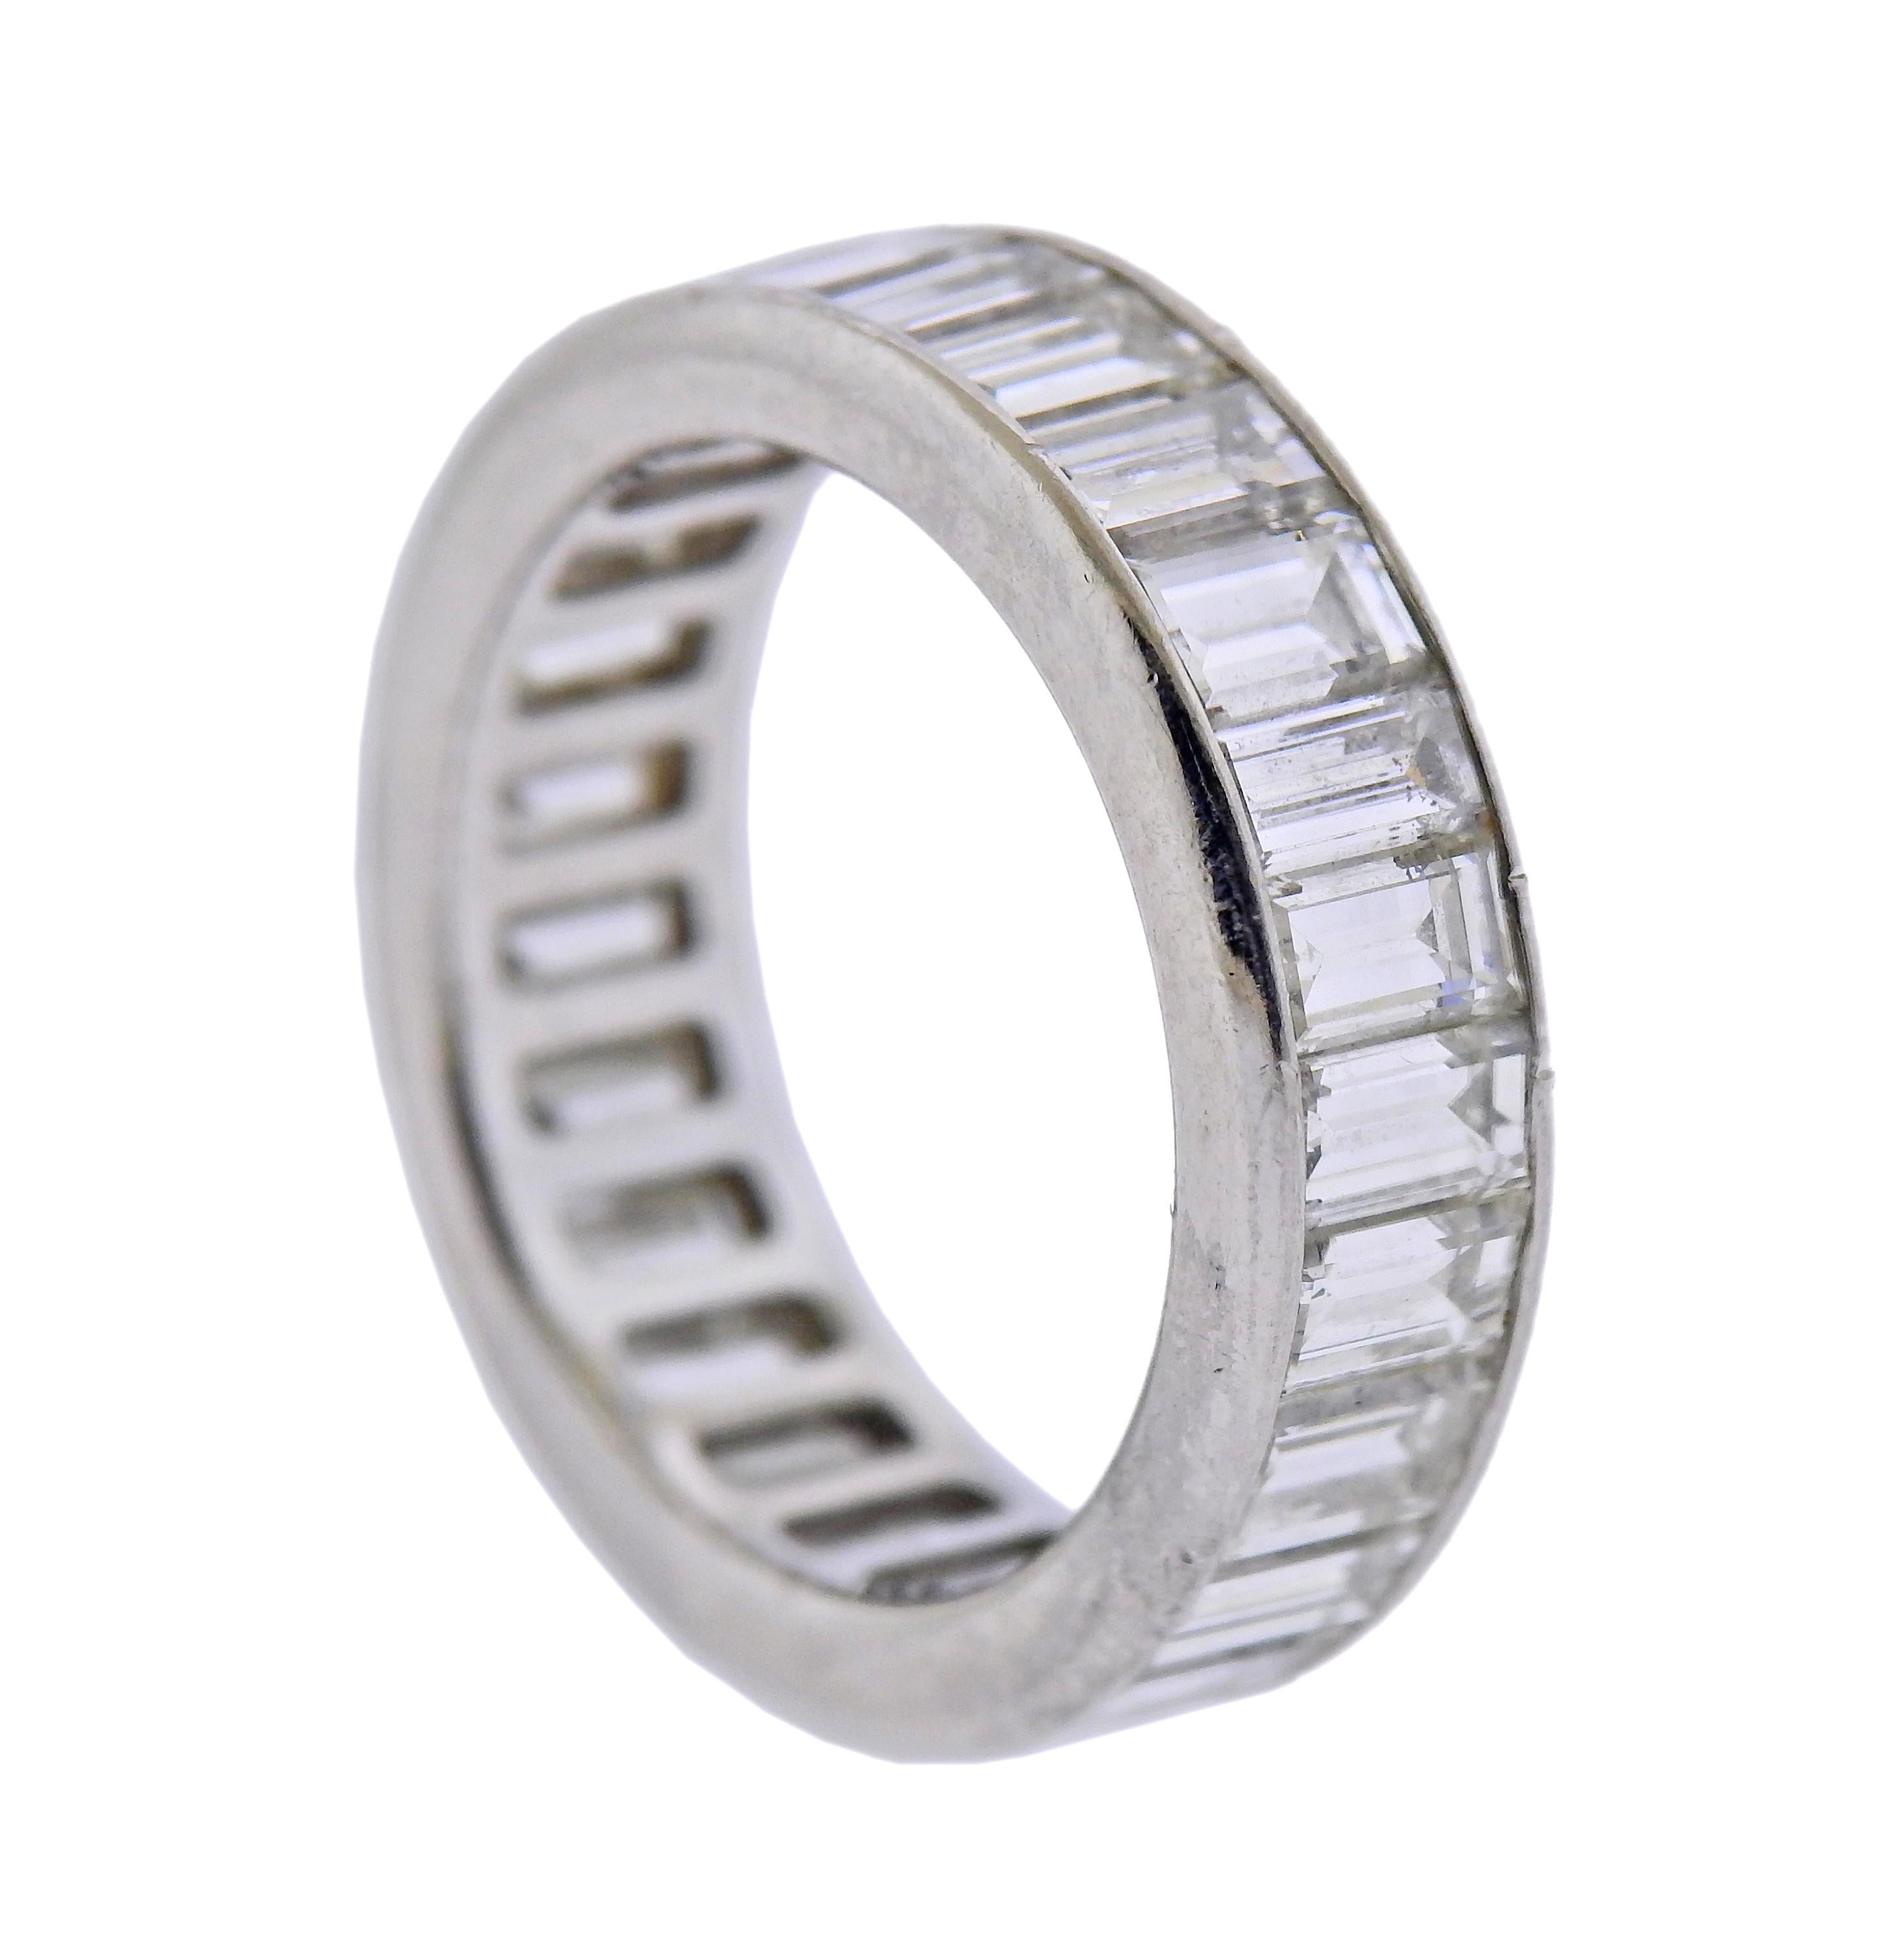 Platinum eternity wedding band ring, with 25 baguette diamonds - approx. 3.75cts. Ring size - 6.5, ring is 6mm wide. Weight - 7 grams.